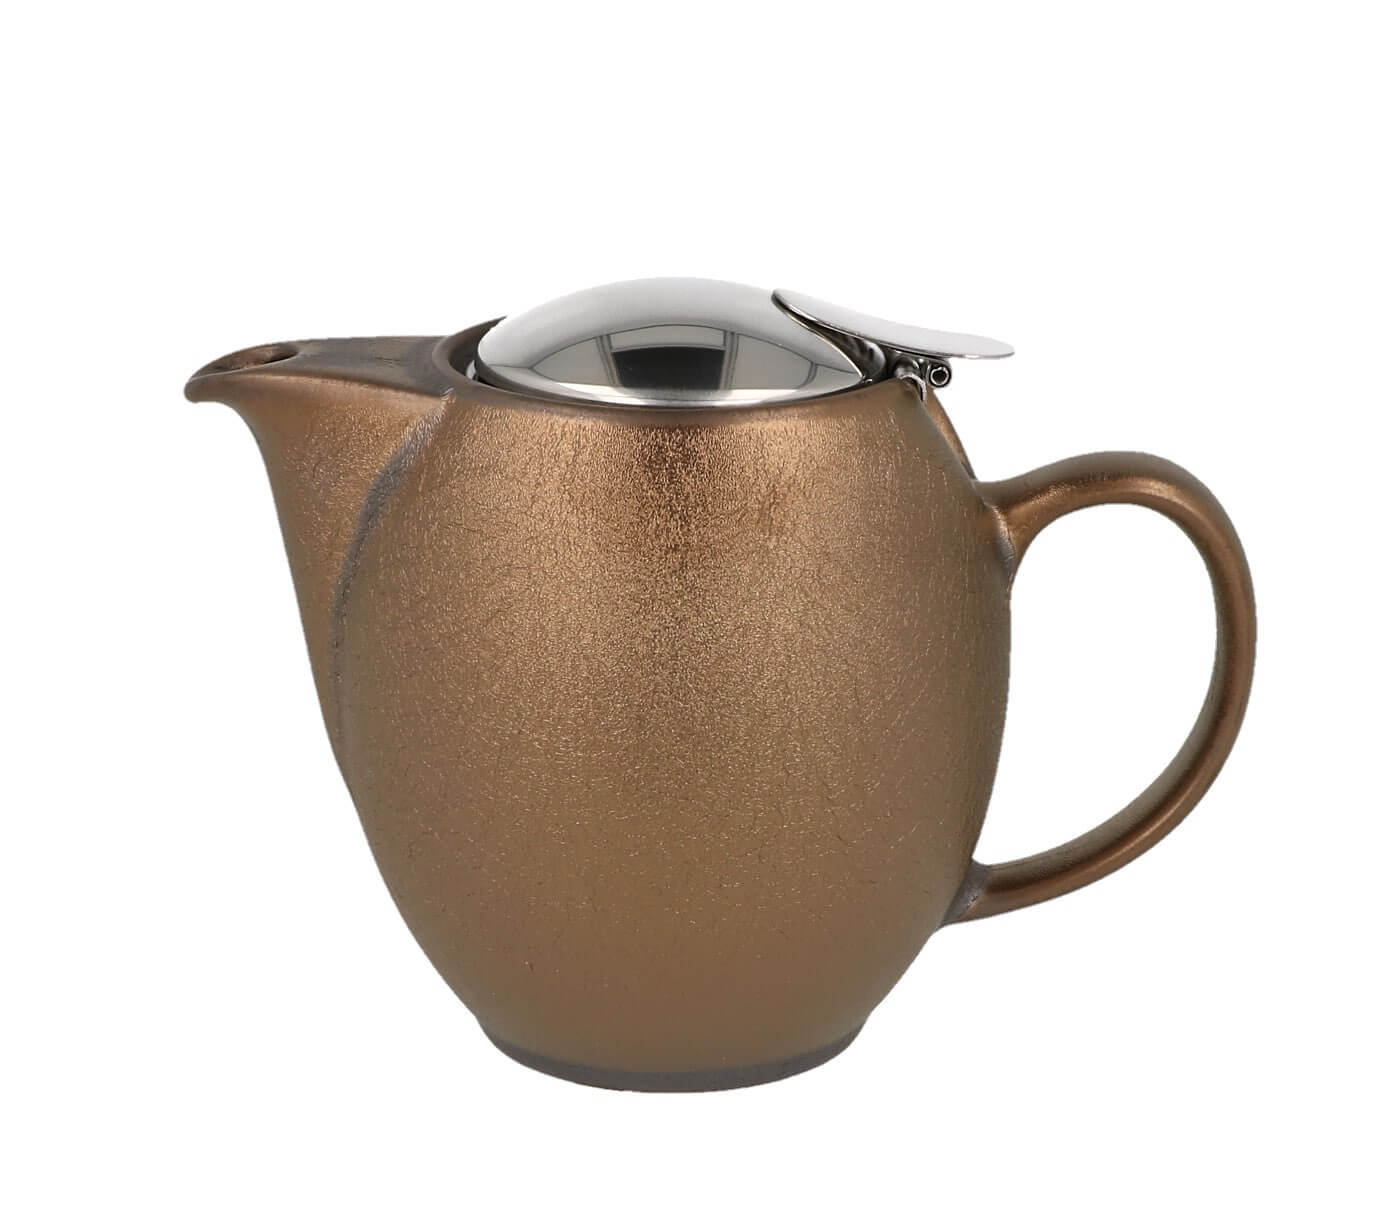 Sideview of the antique gold-colored ZERO JAPAN teapot with 350 ml capacity